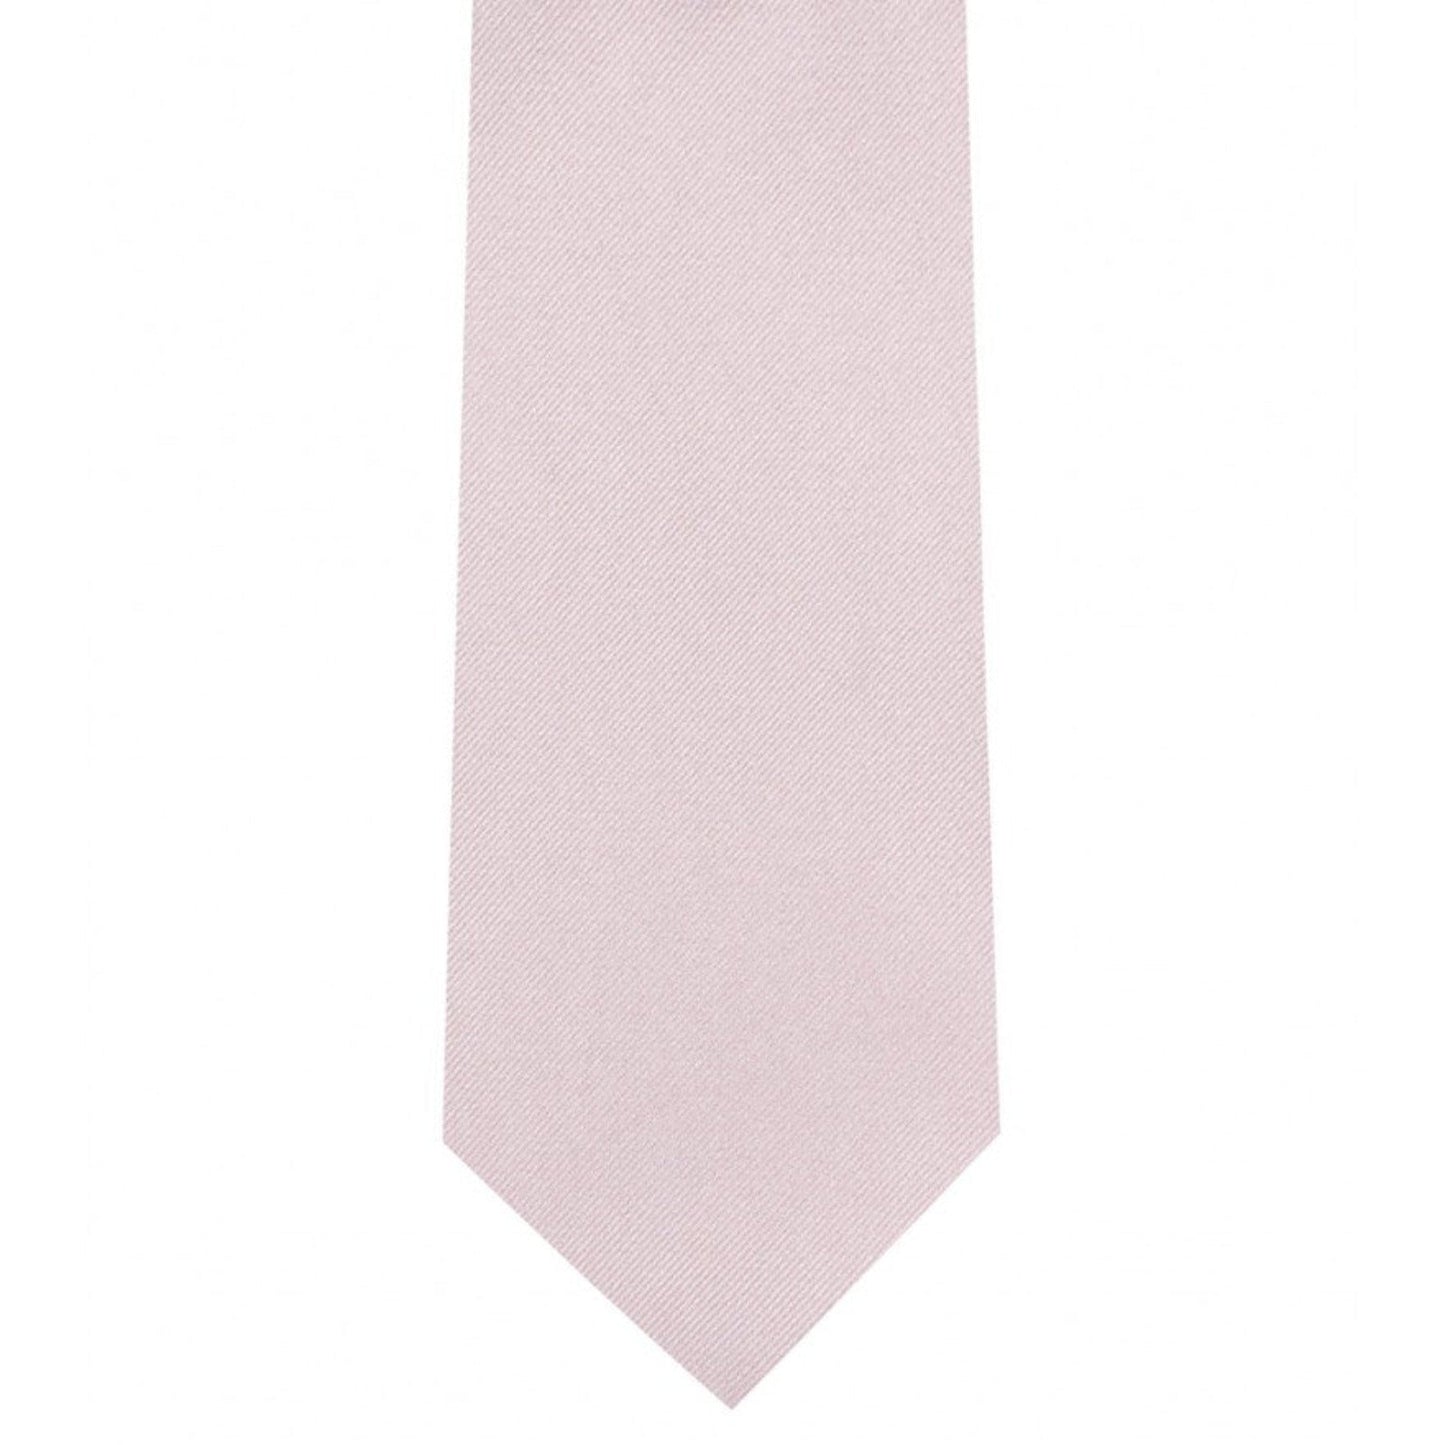 Classic Light Pink Tie Ultra Skinny tie width 2.25 inches With Matching Pocket Square | KCT Menswear